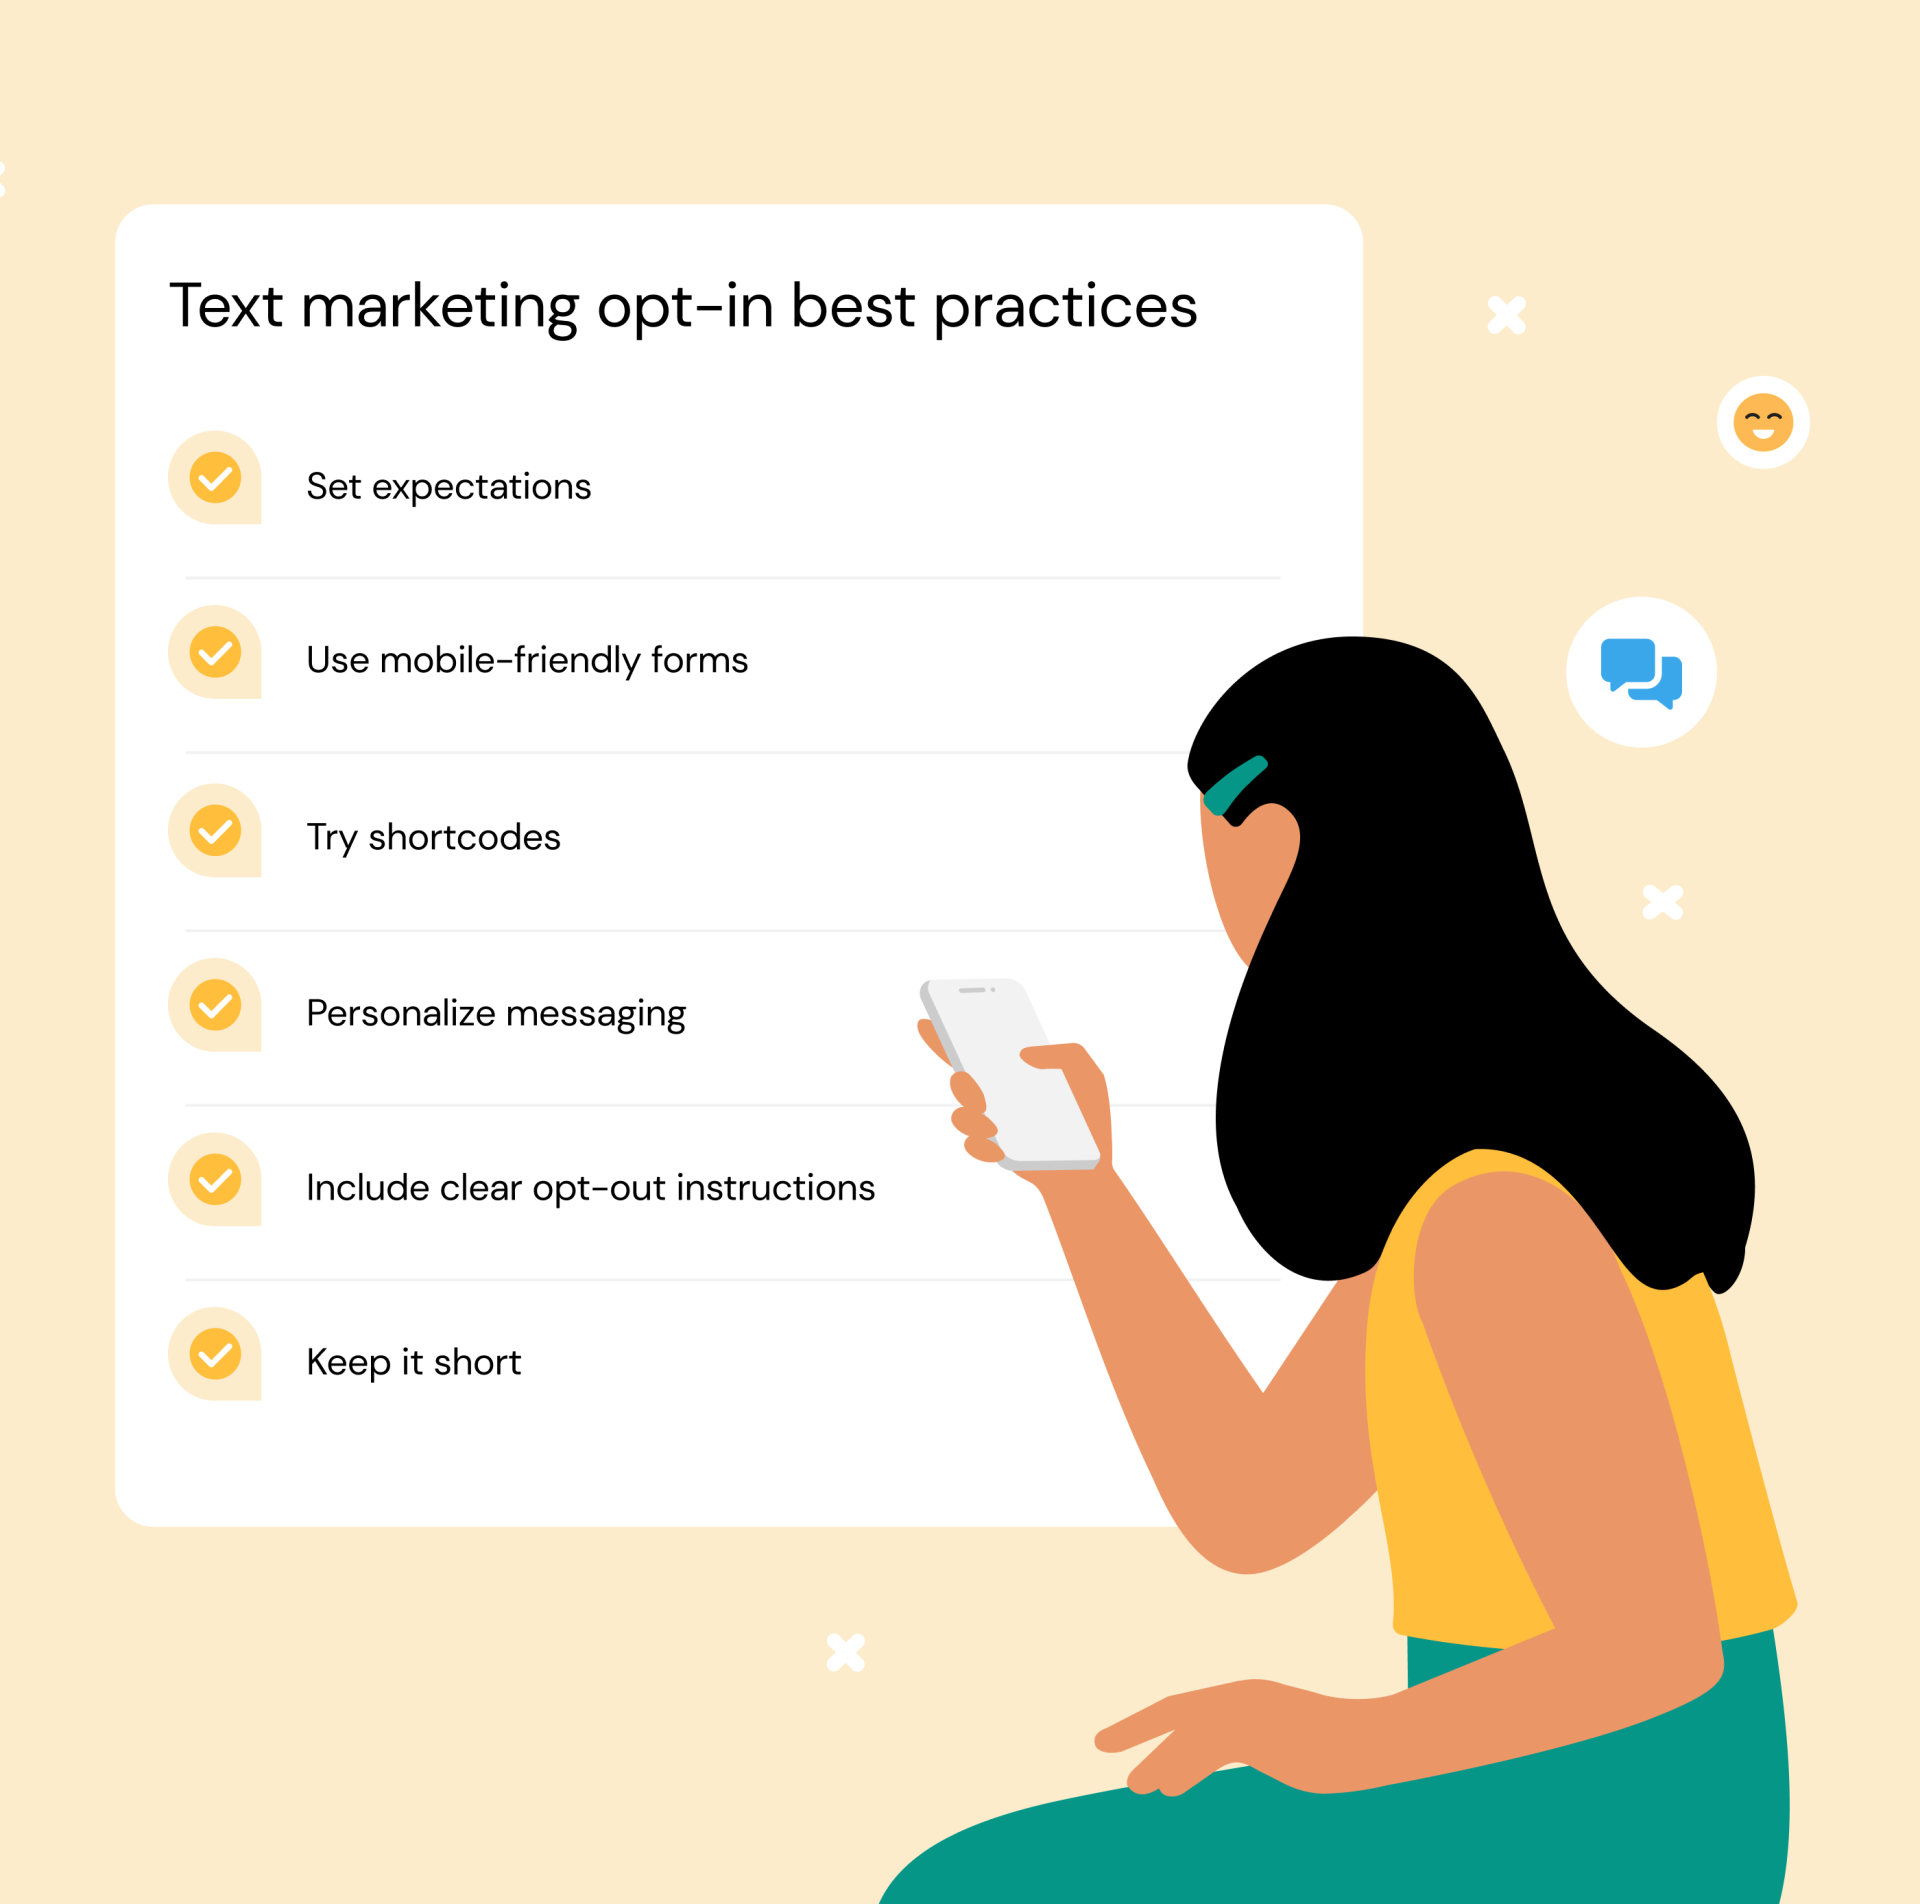 SMS opt-in best practices for getting started